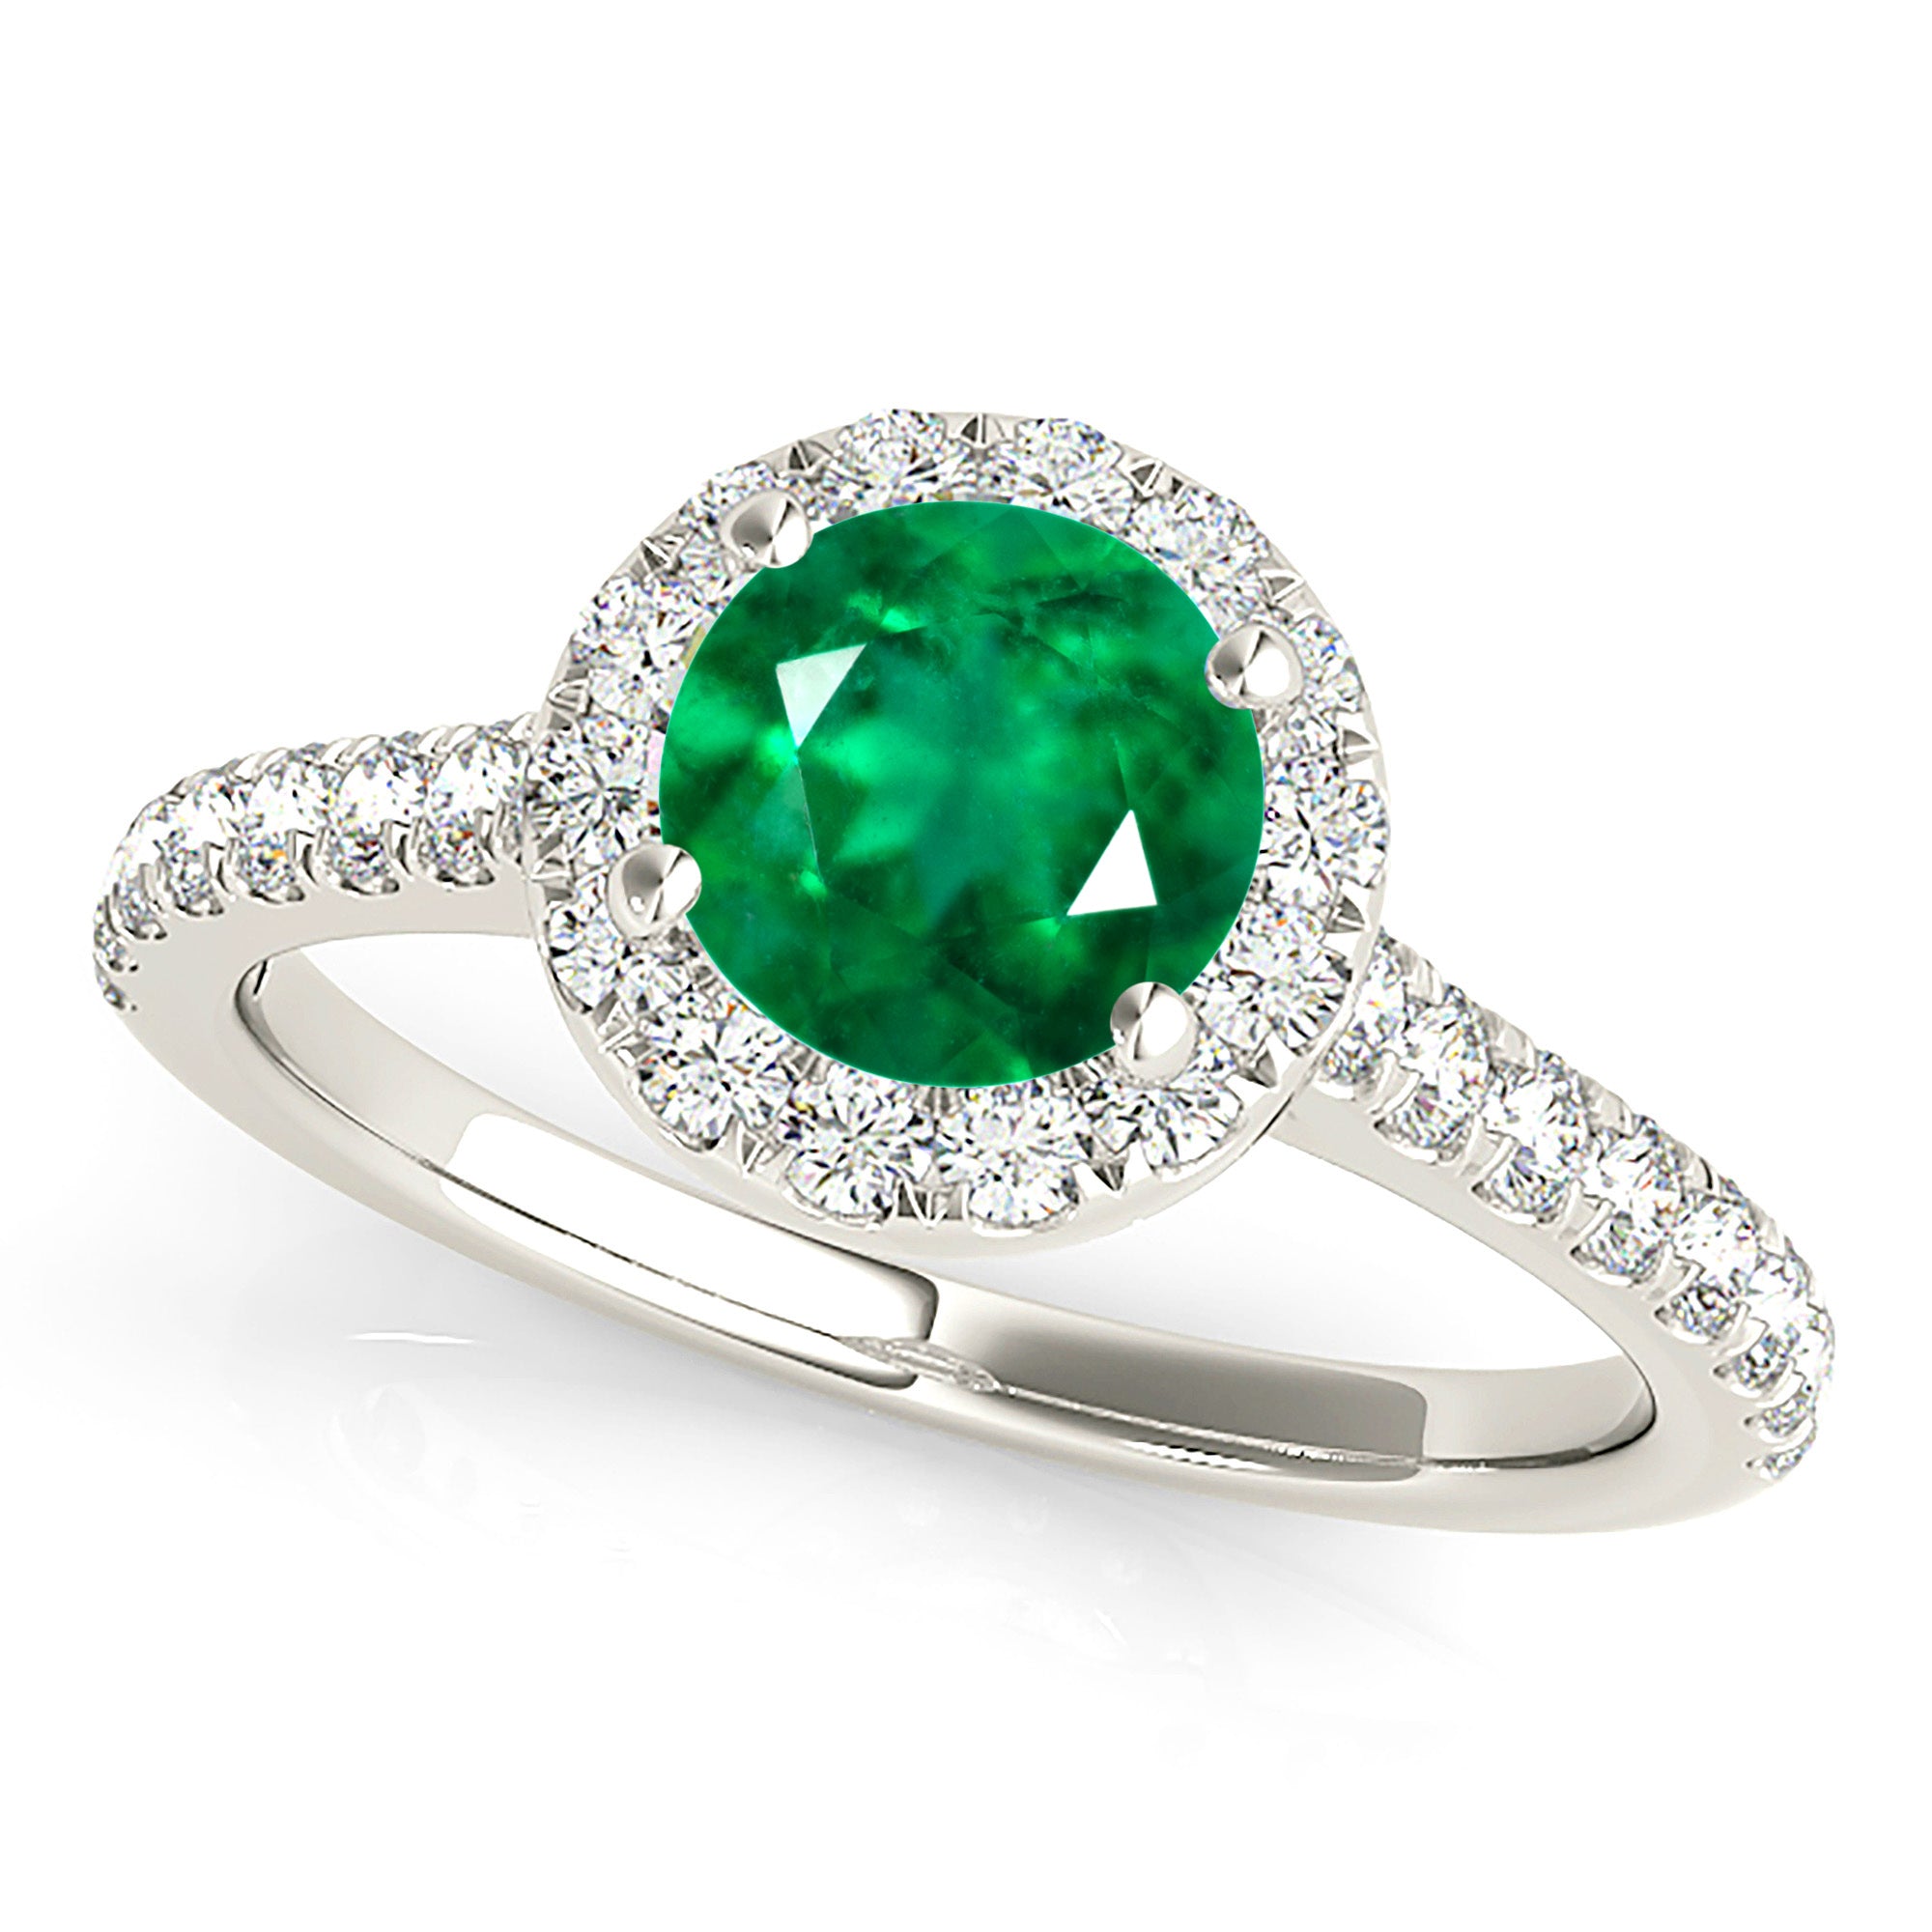 1.14 ct. Genuine Emerald Ring with 0.35 ctw. Diamond Halo And Thin Band,Side Accent Diamonds-in 14K/18K White, Yellow, Rose Gold and Platinum - Christmas Jewelry Gift -VIRABYANI